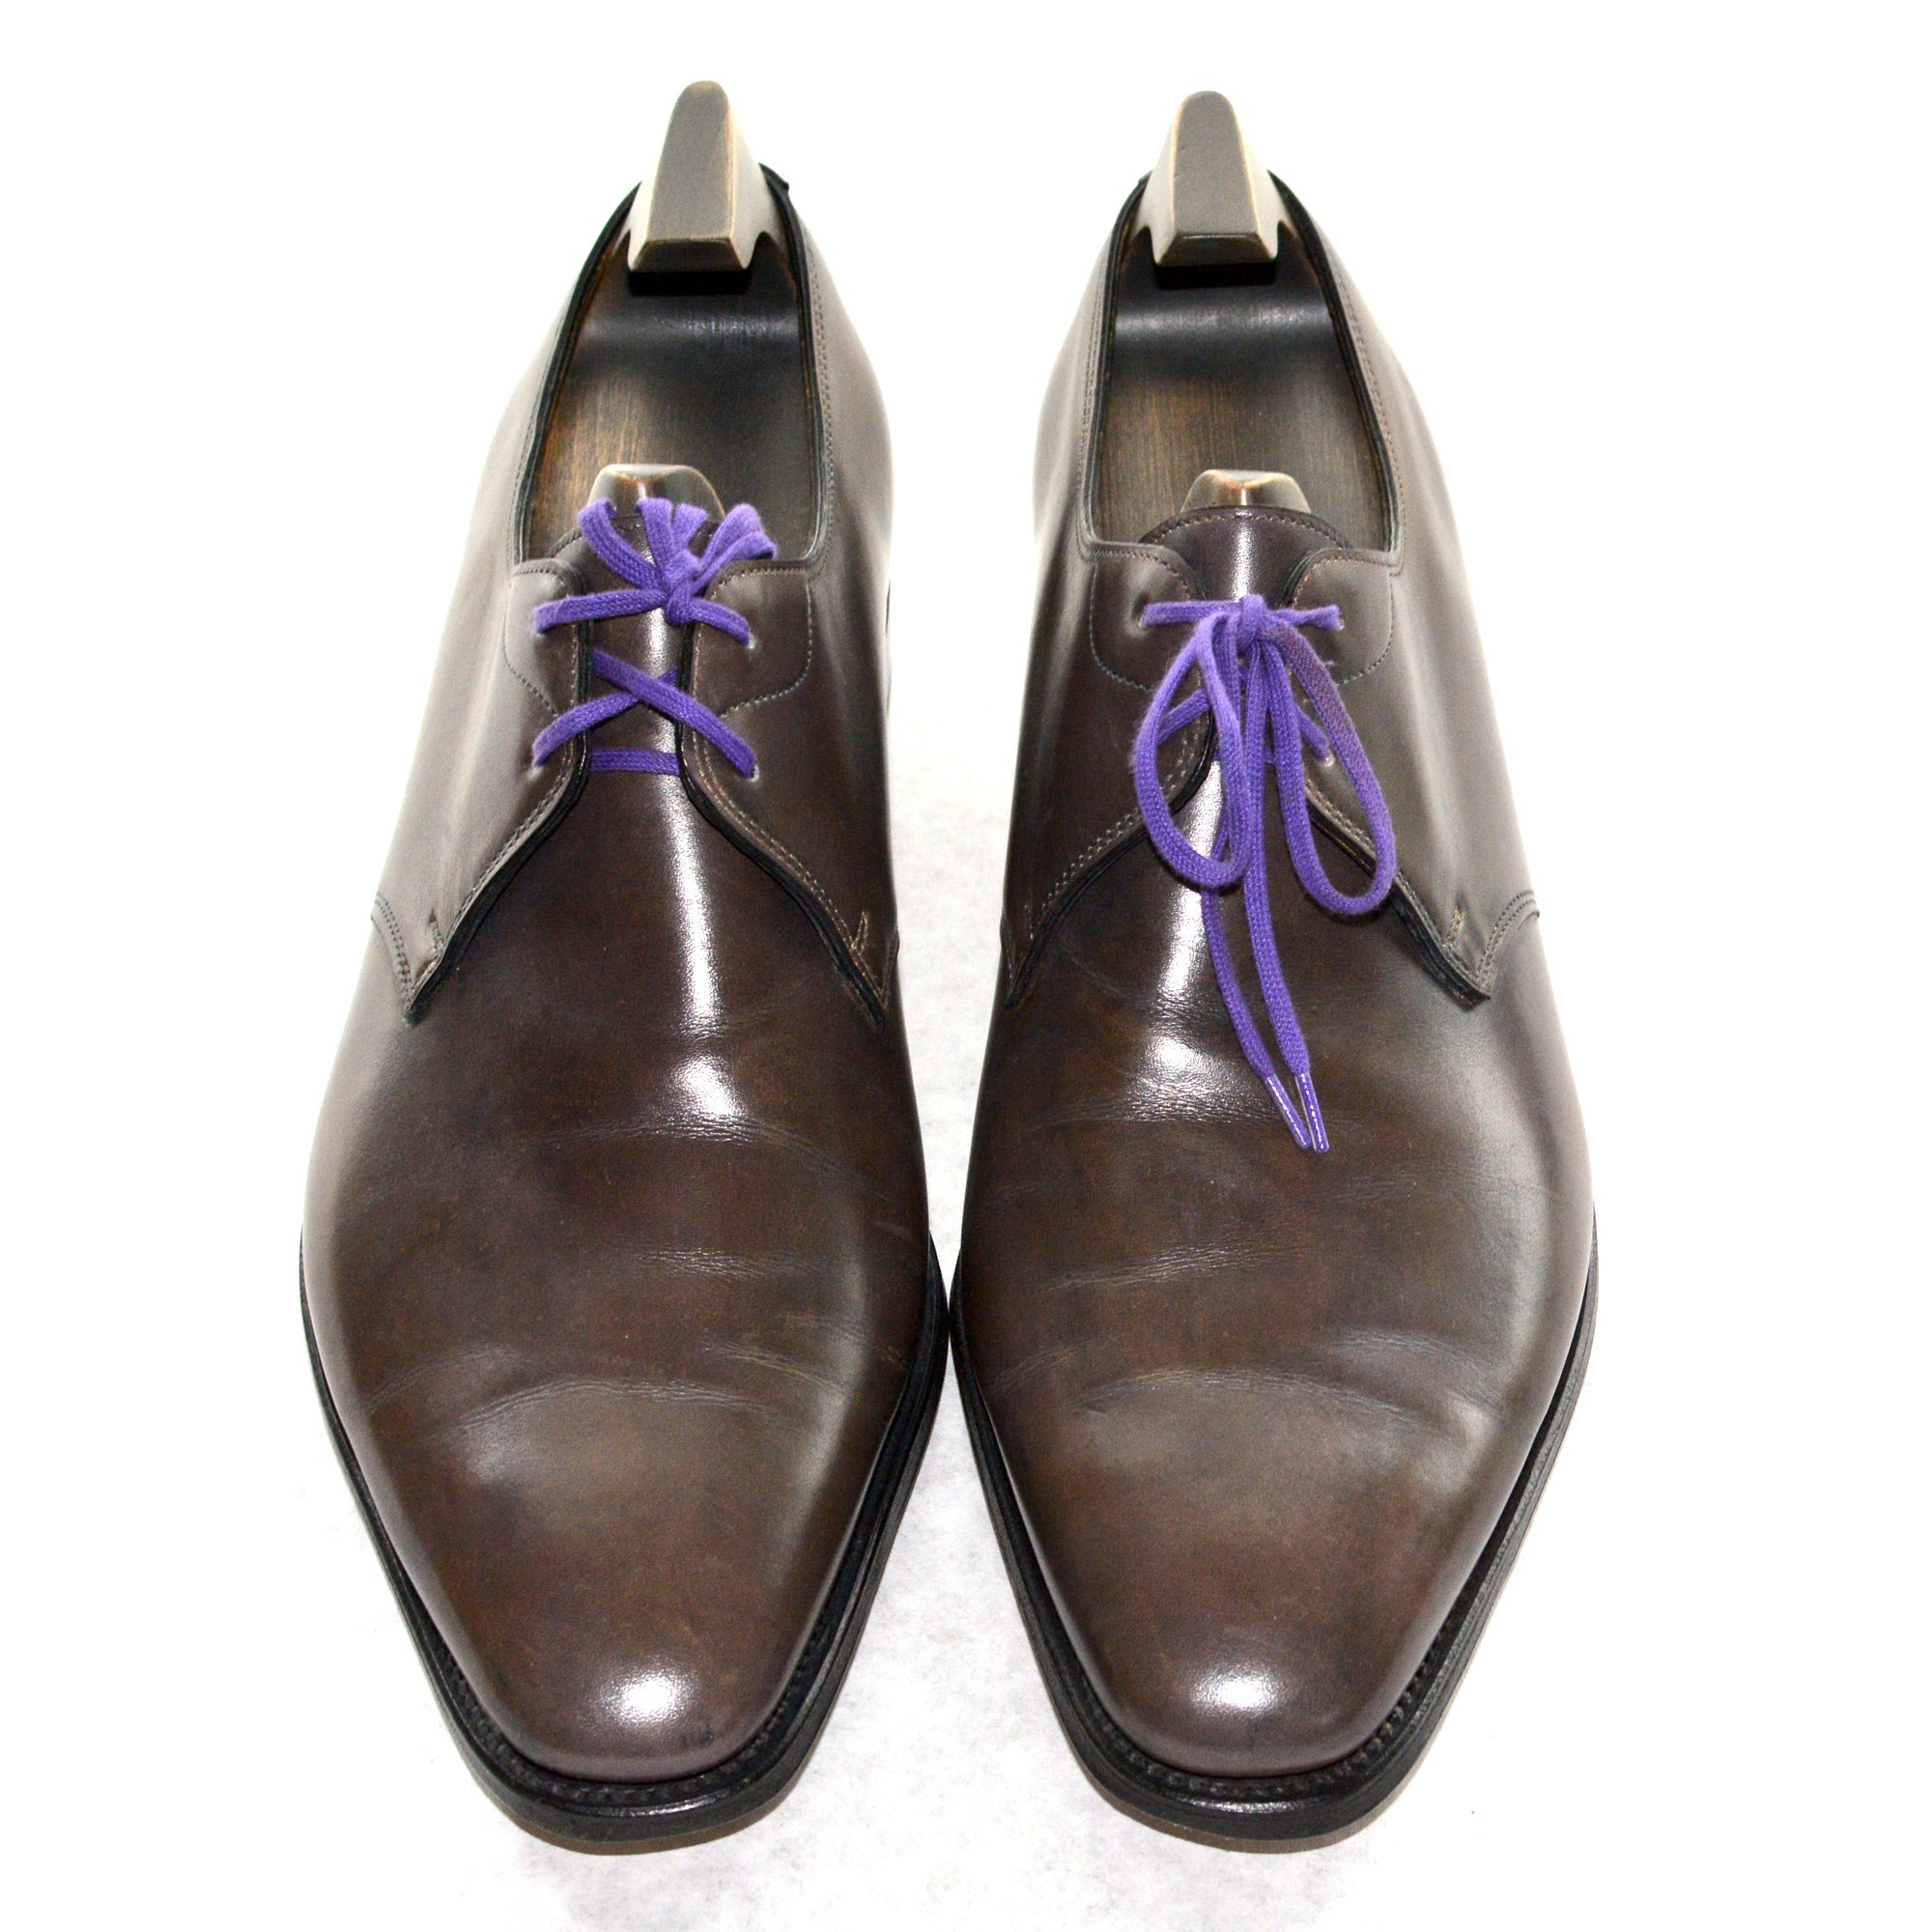 JOHN LOBB x PAUL SMITH "Willoughby" Museum Calf Derby Shoes 8.5E US 9.5 8000